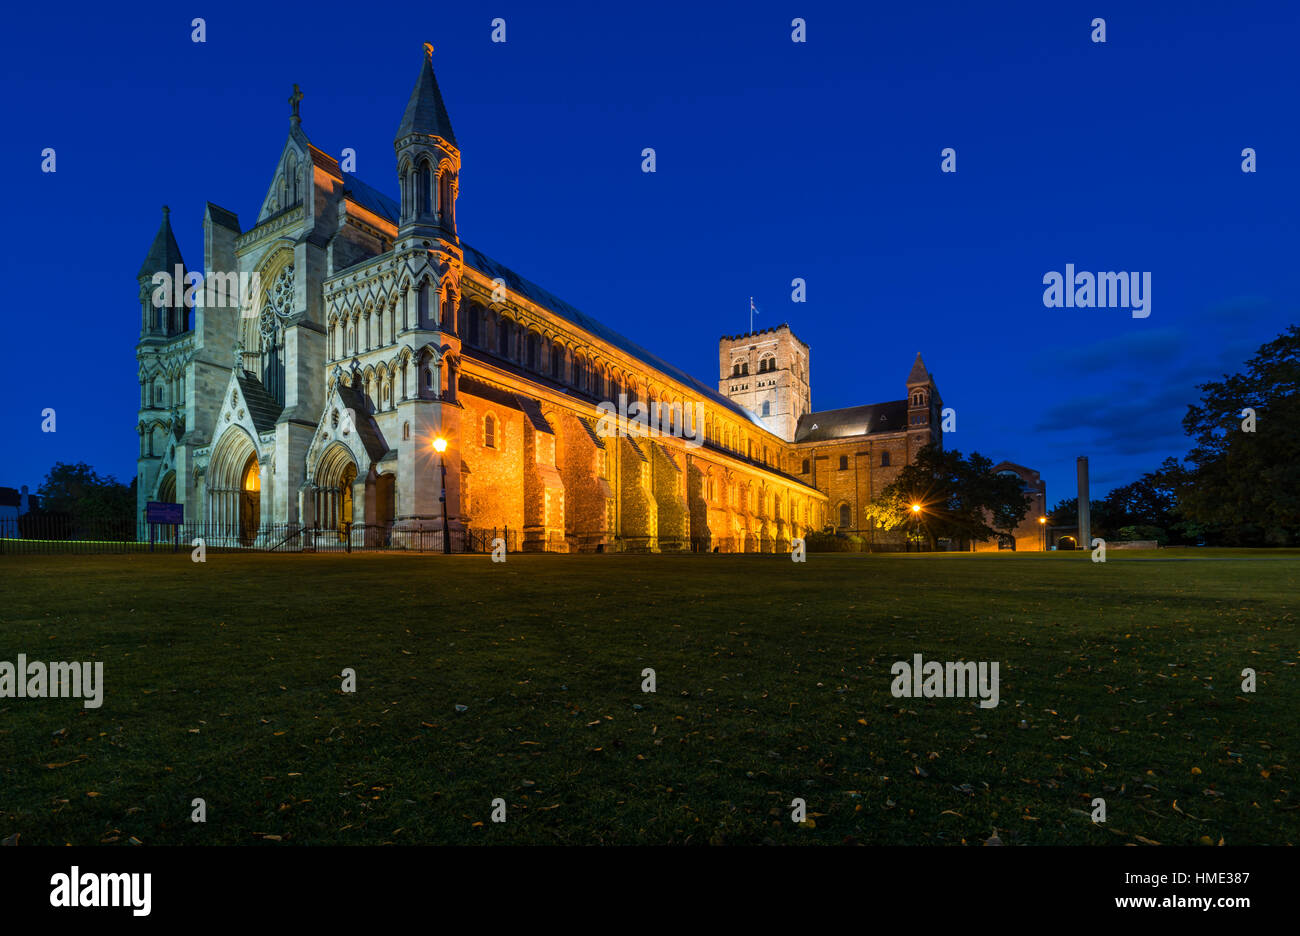 Side view of lit up St Albans Cathedral (St Albans, Hertfordshire) during evening blue hour Stock Photo